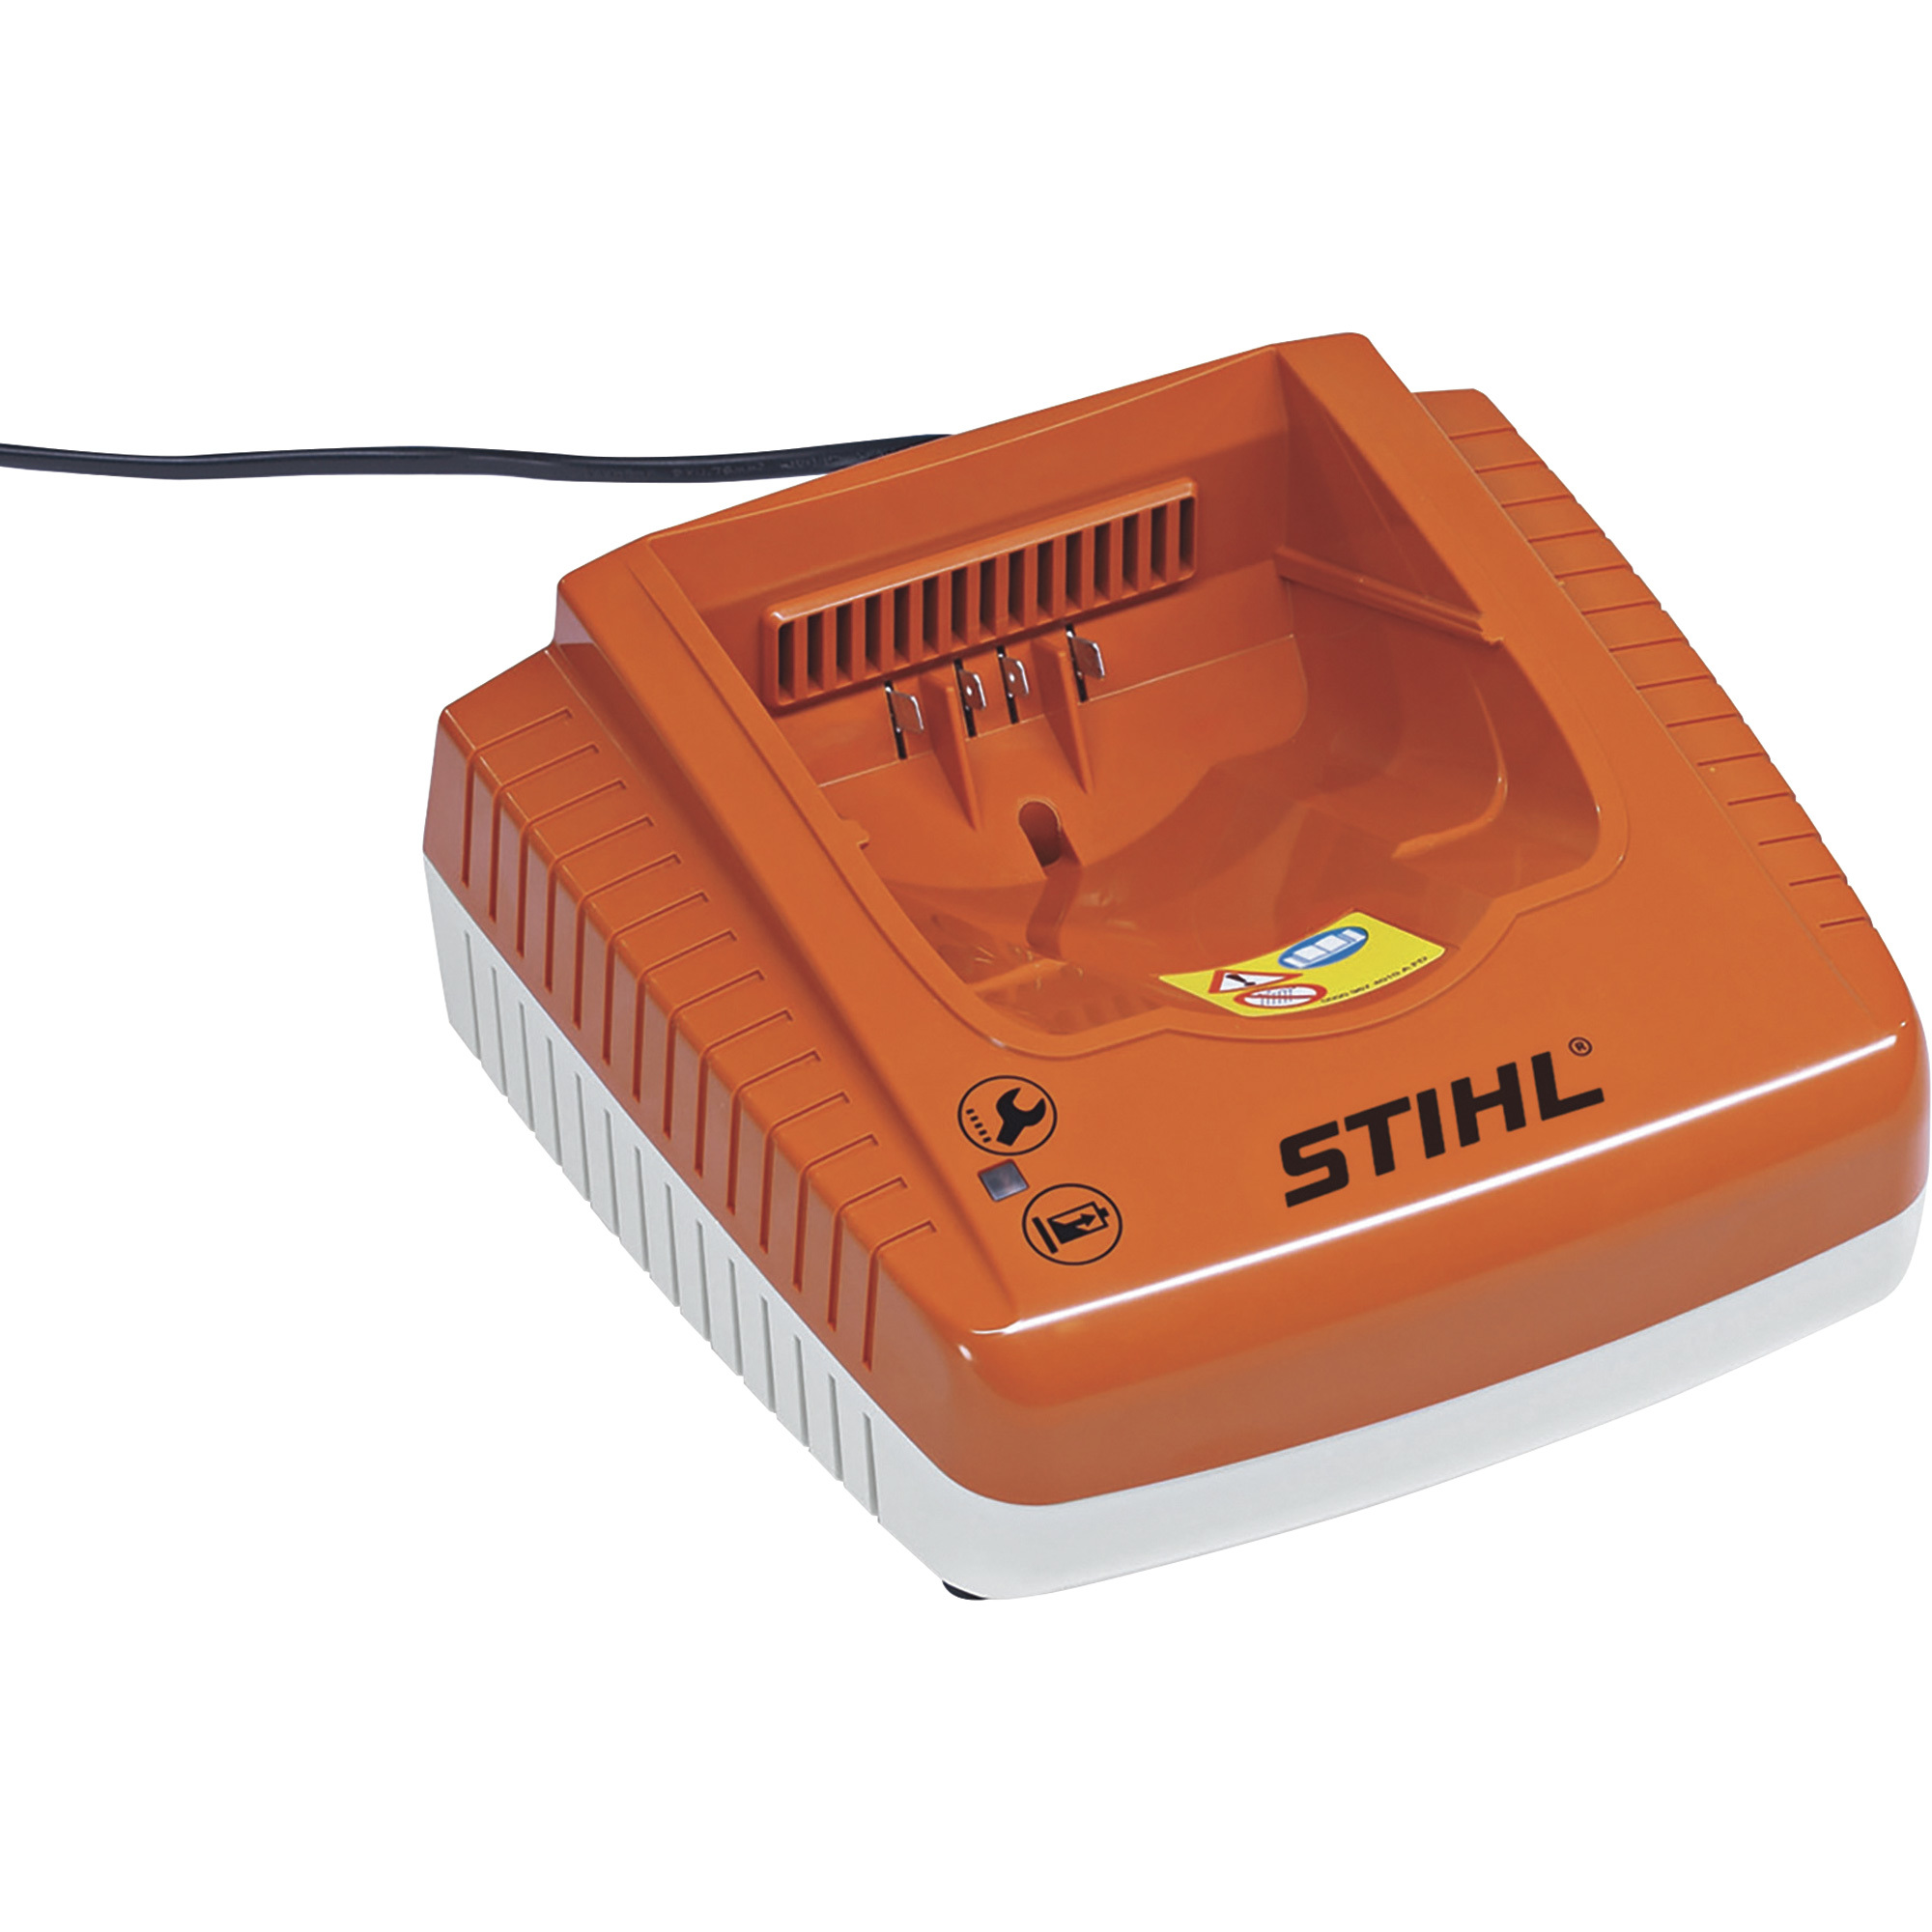 Stihl Rapid Lithium-Ion Battery Charger — Model AL 300 -  4850 430 5502